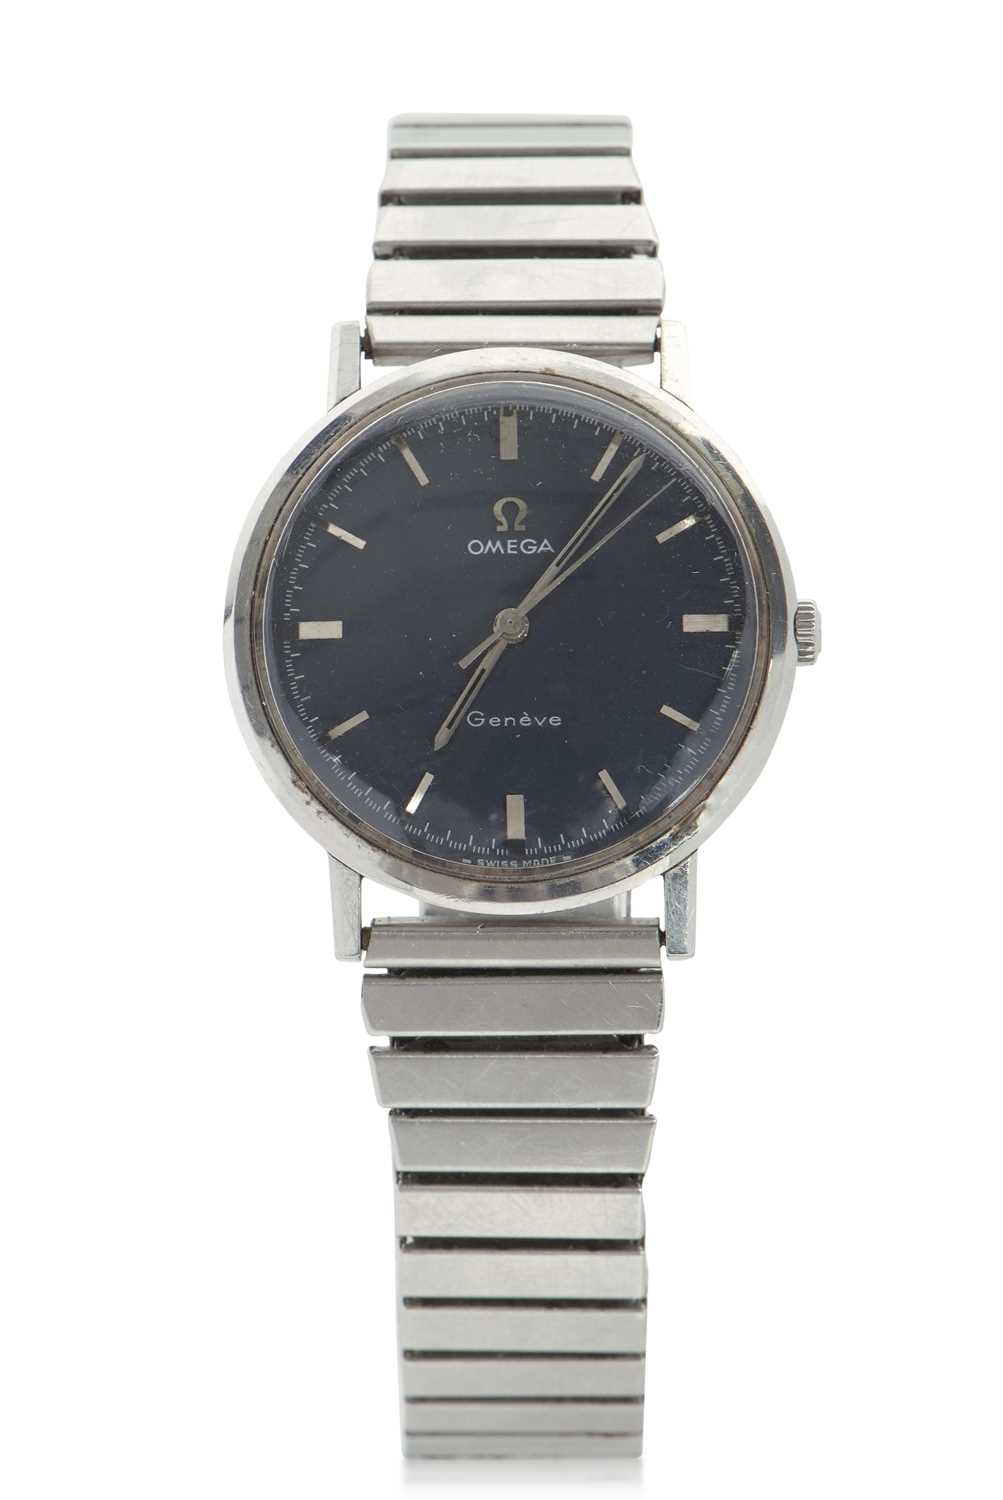 An Omega Geneve gents watch with a blue dial and silver coloured baton hour markers and hands, has a